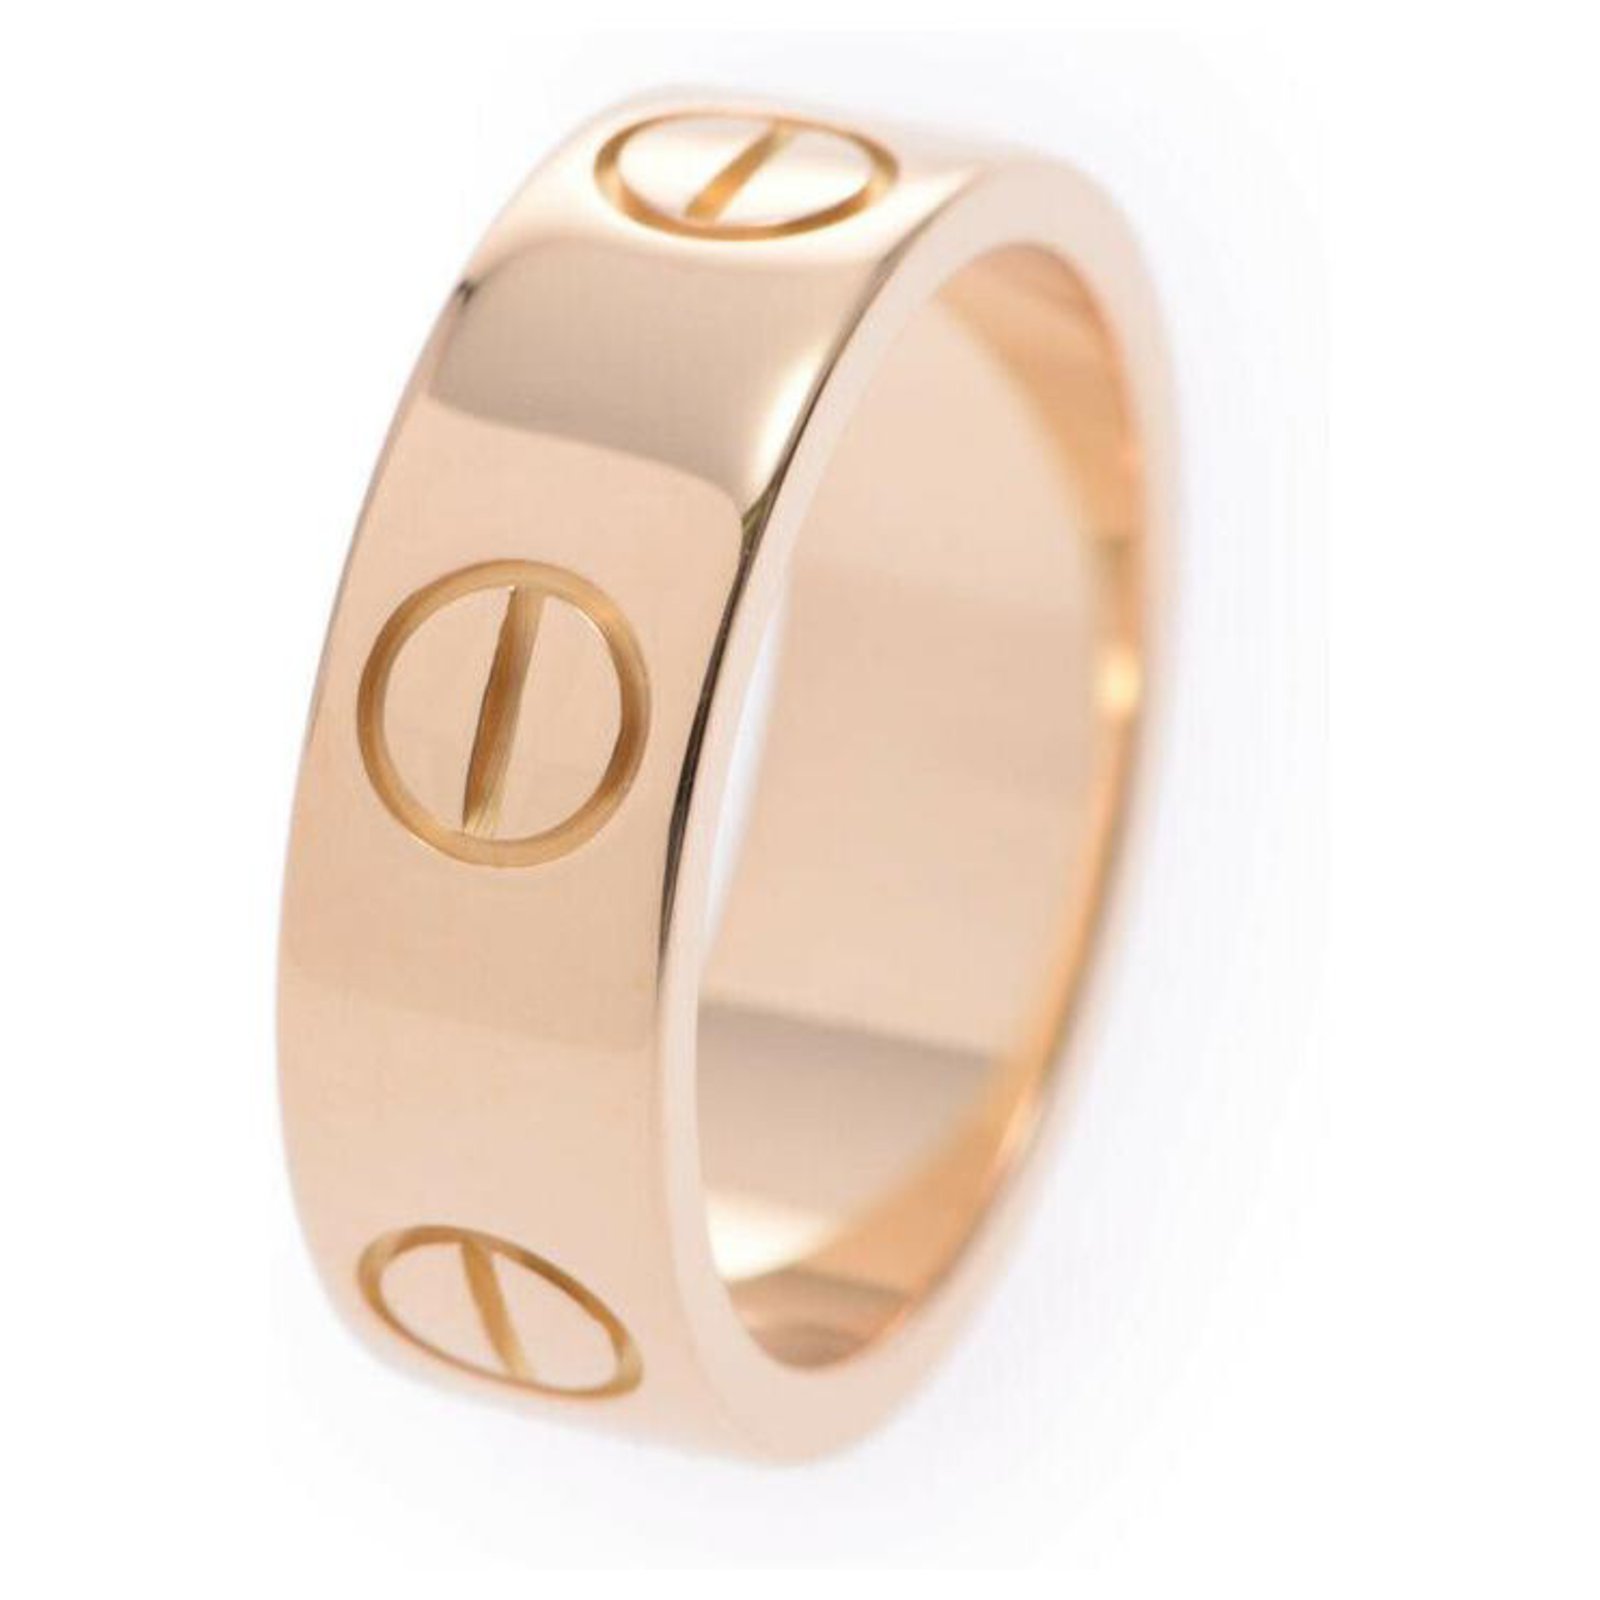 how much does a cartier love ring weight